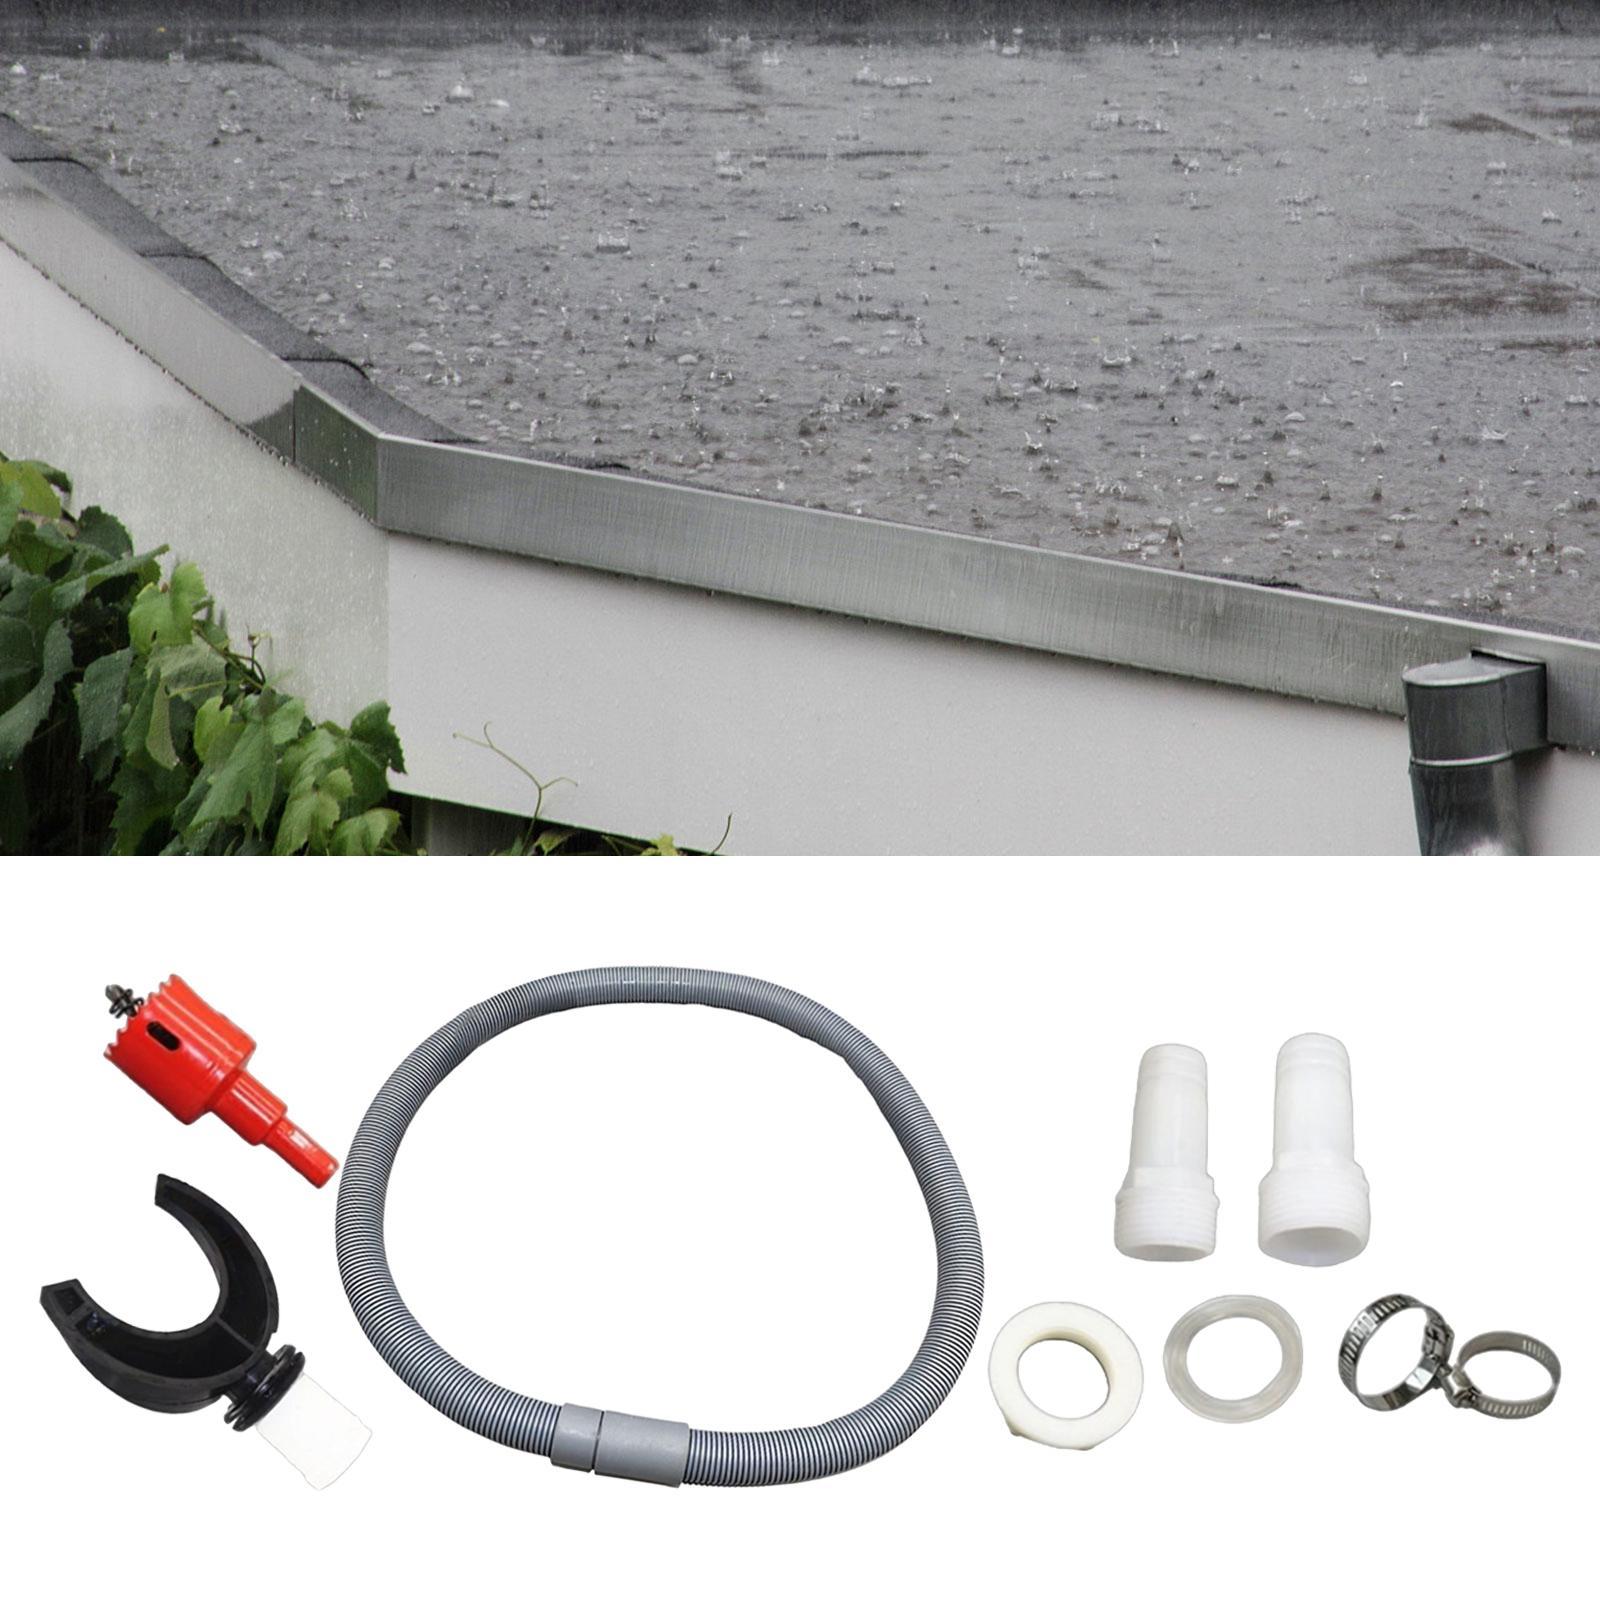 Rain Water Catching System Rain Barrel Diverter Kits for Outdoor Chores Roof